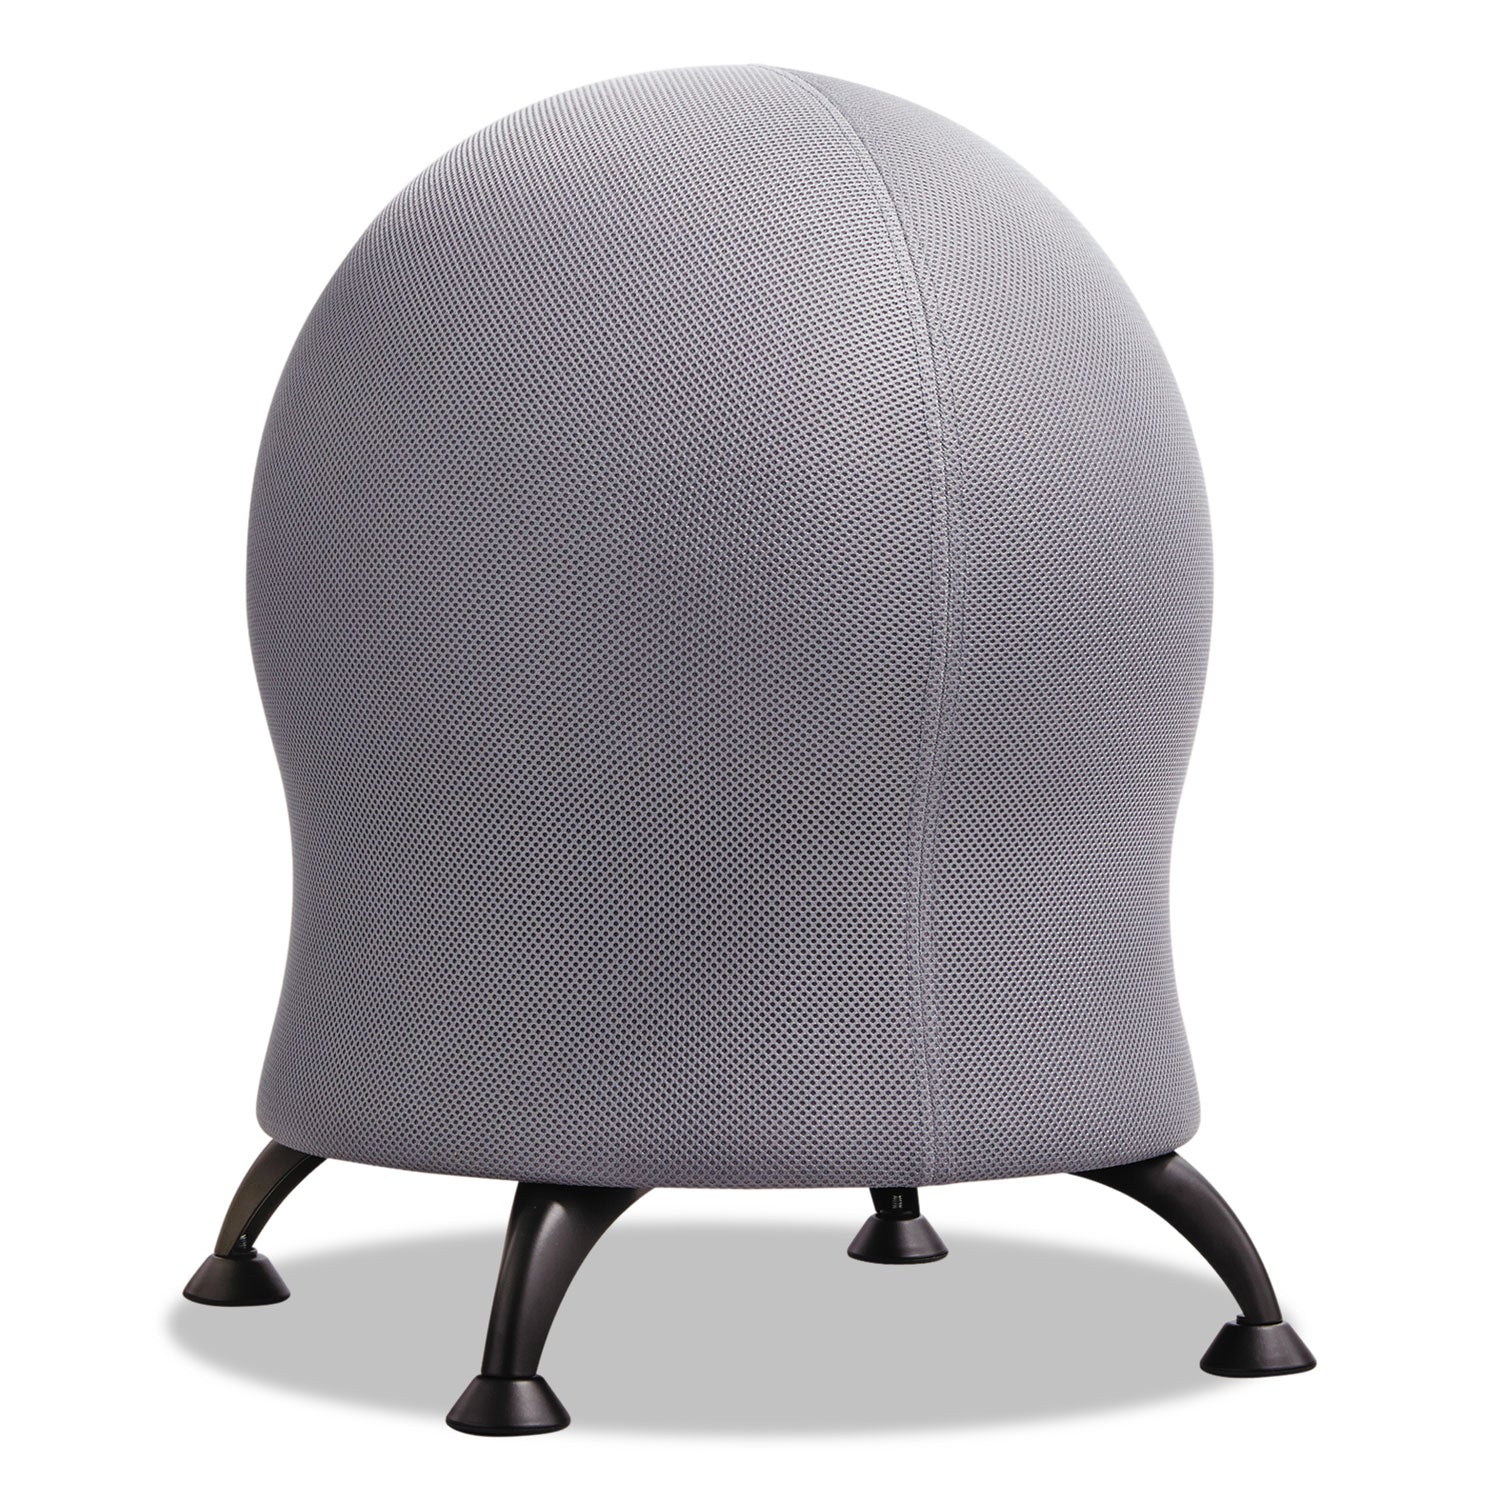 Zenergy Ball Chair, Backless, Supports Up to 250 lb, Gray Fabric Seat, Black Base - 